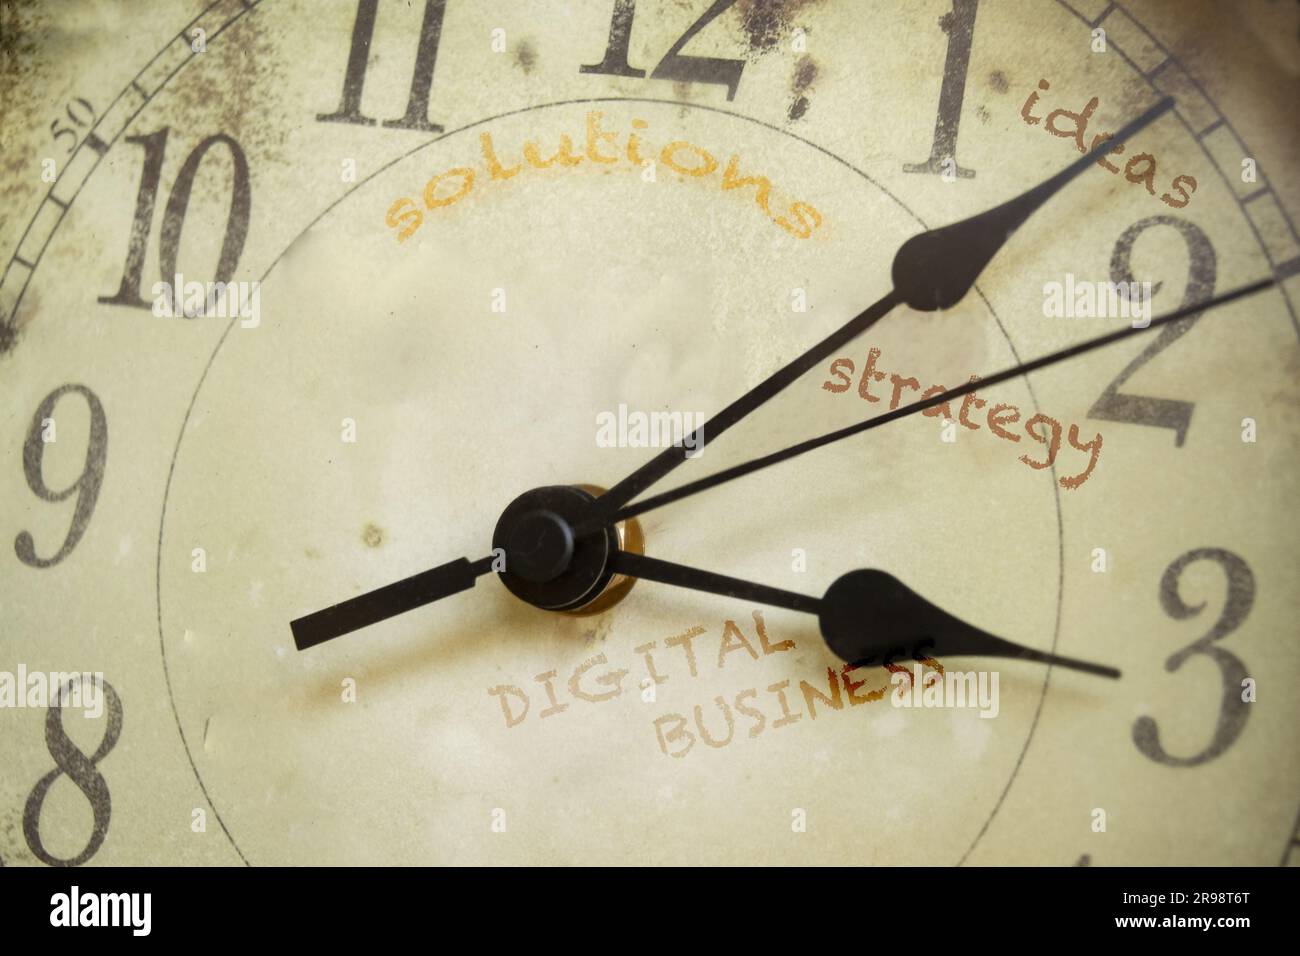 digital business idea with an old clock and the writtens on the face Stock Photo